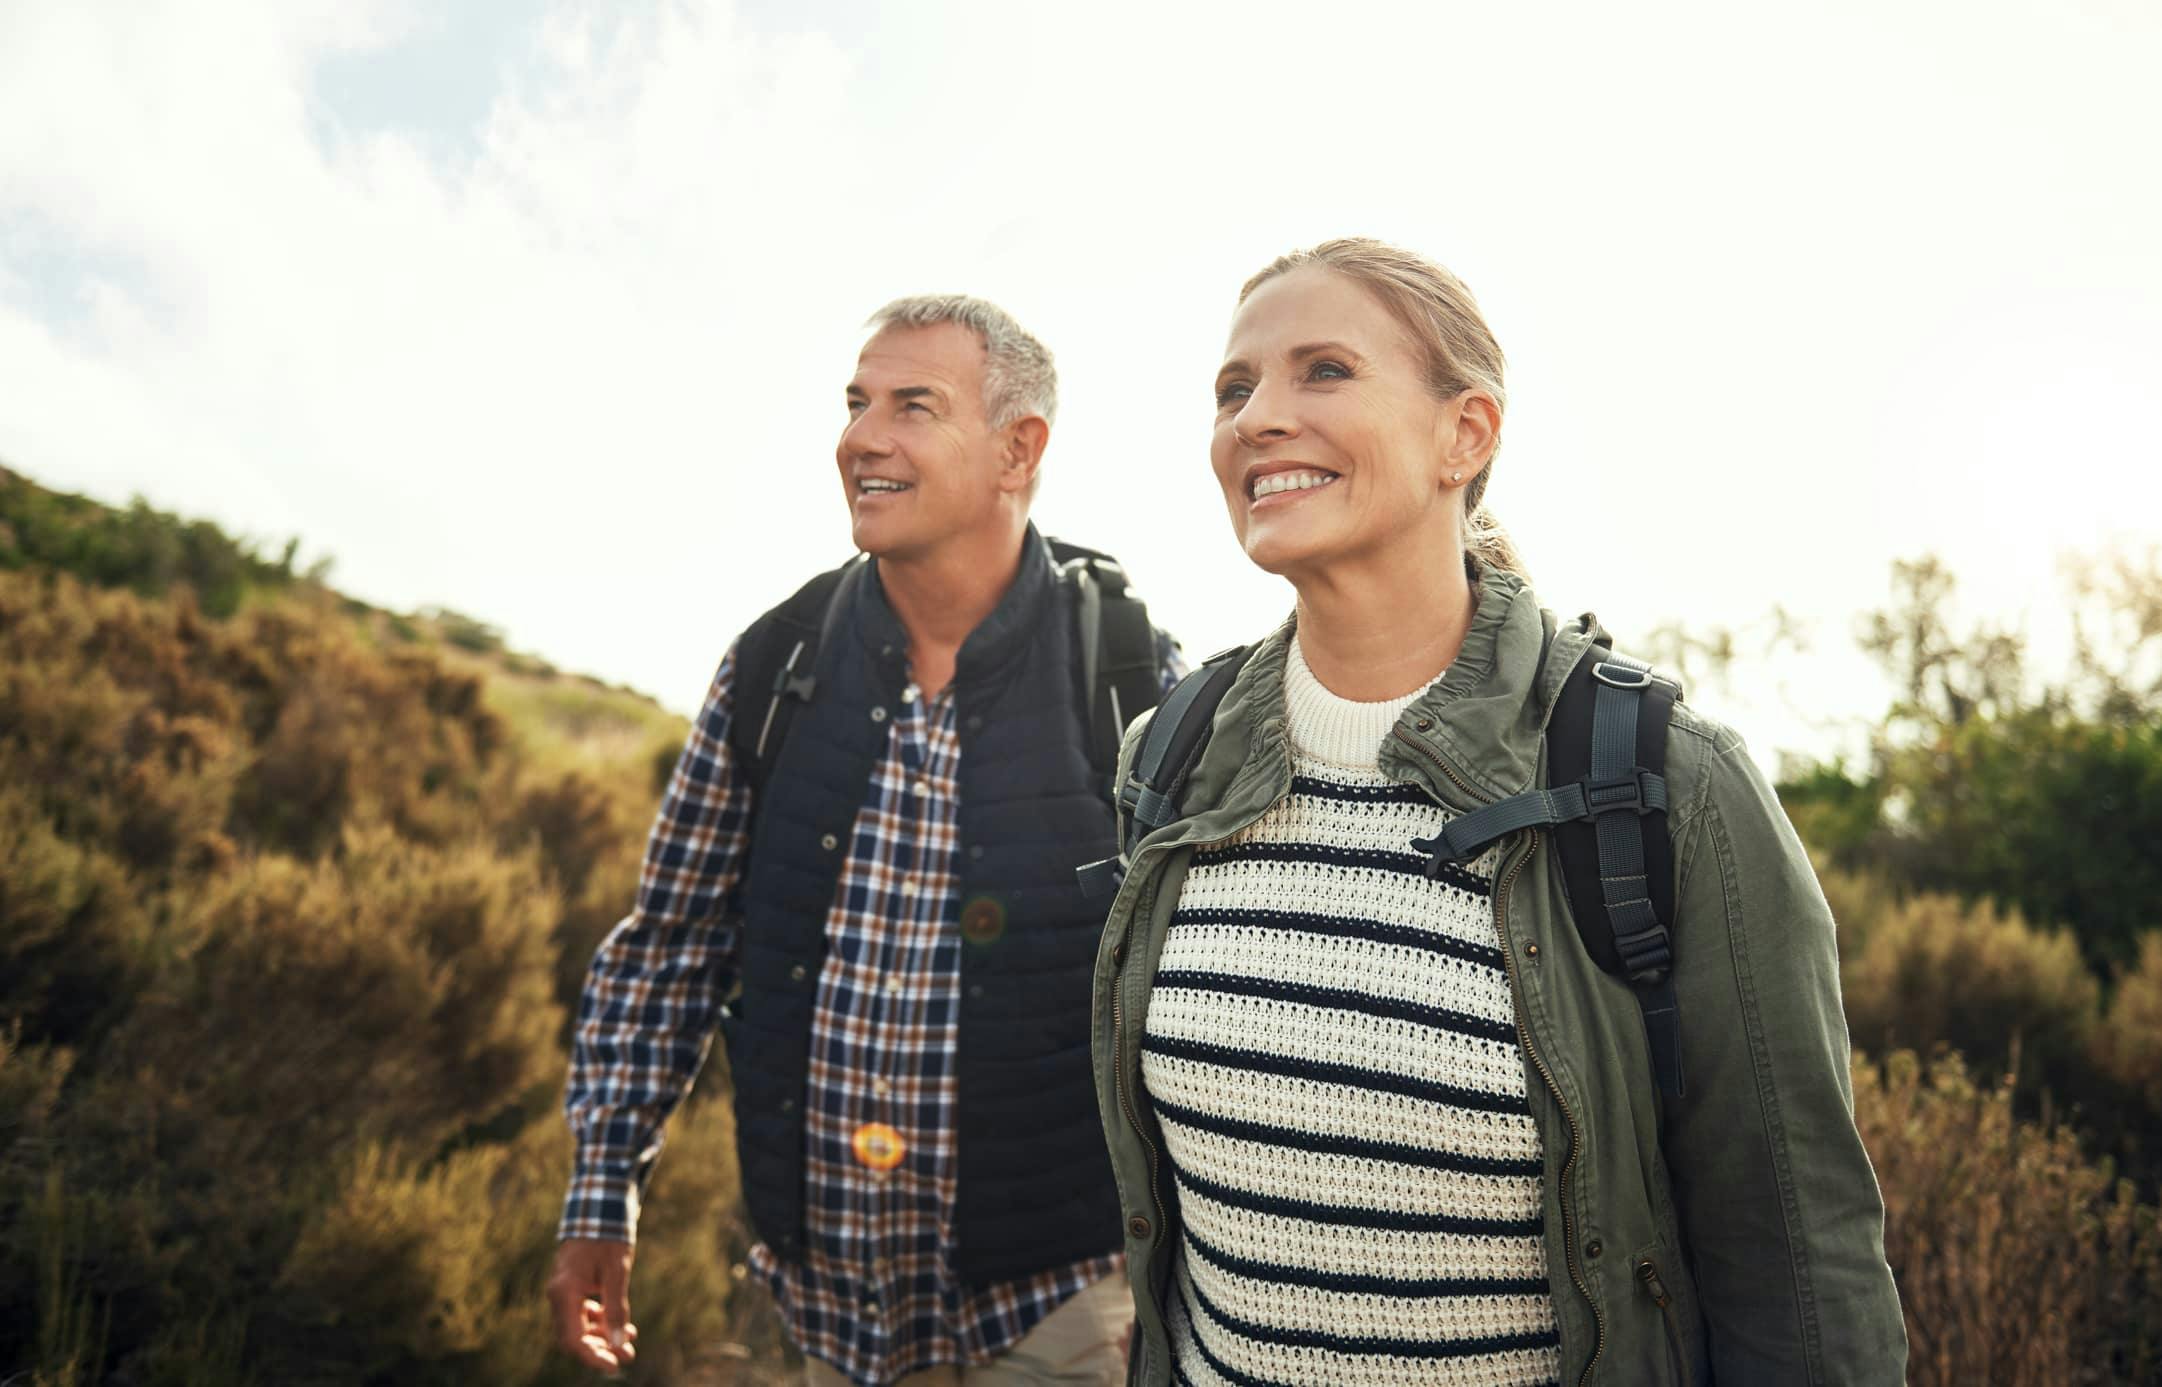 Older man and woman smiling and hiking together